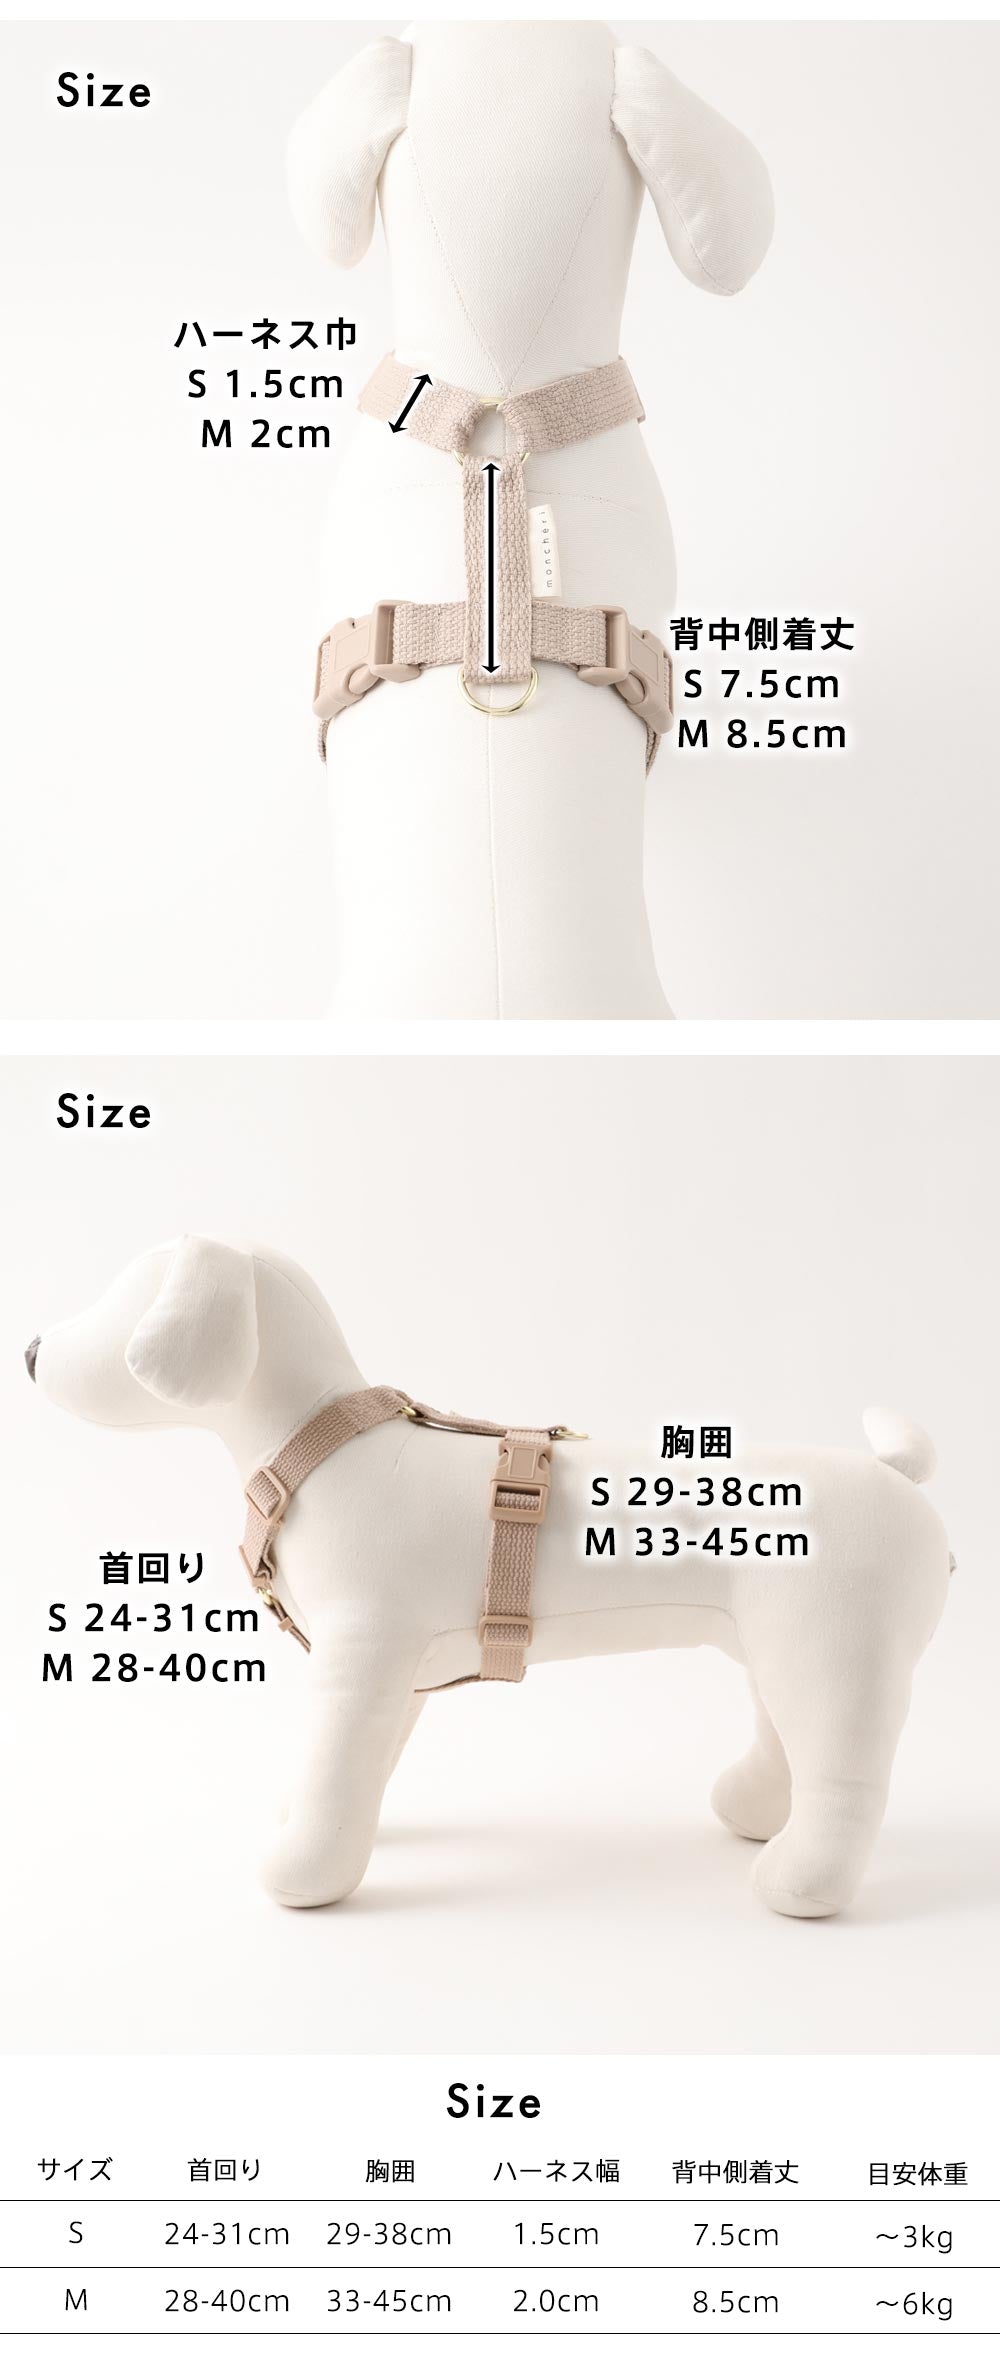 Small dog/harness/lead/walk/go out/fashion/cute/coordination item/size